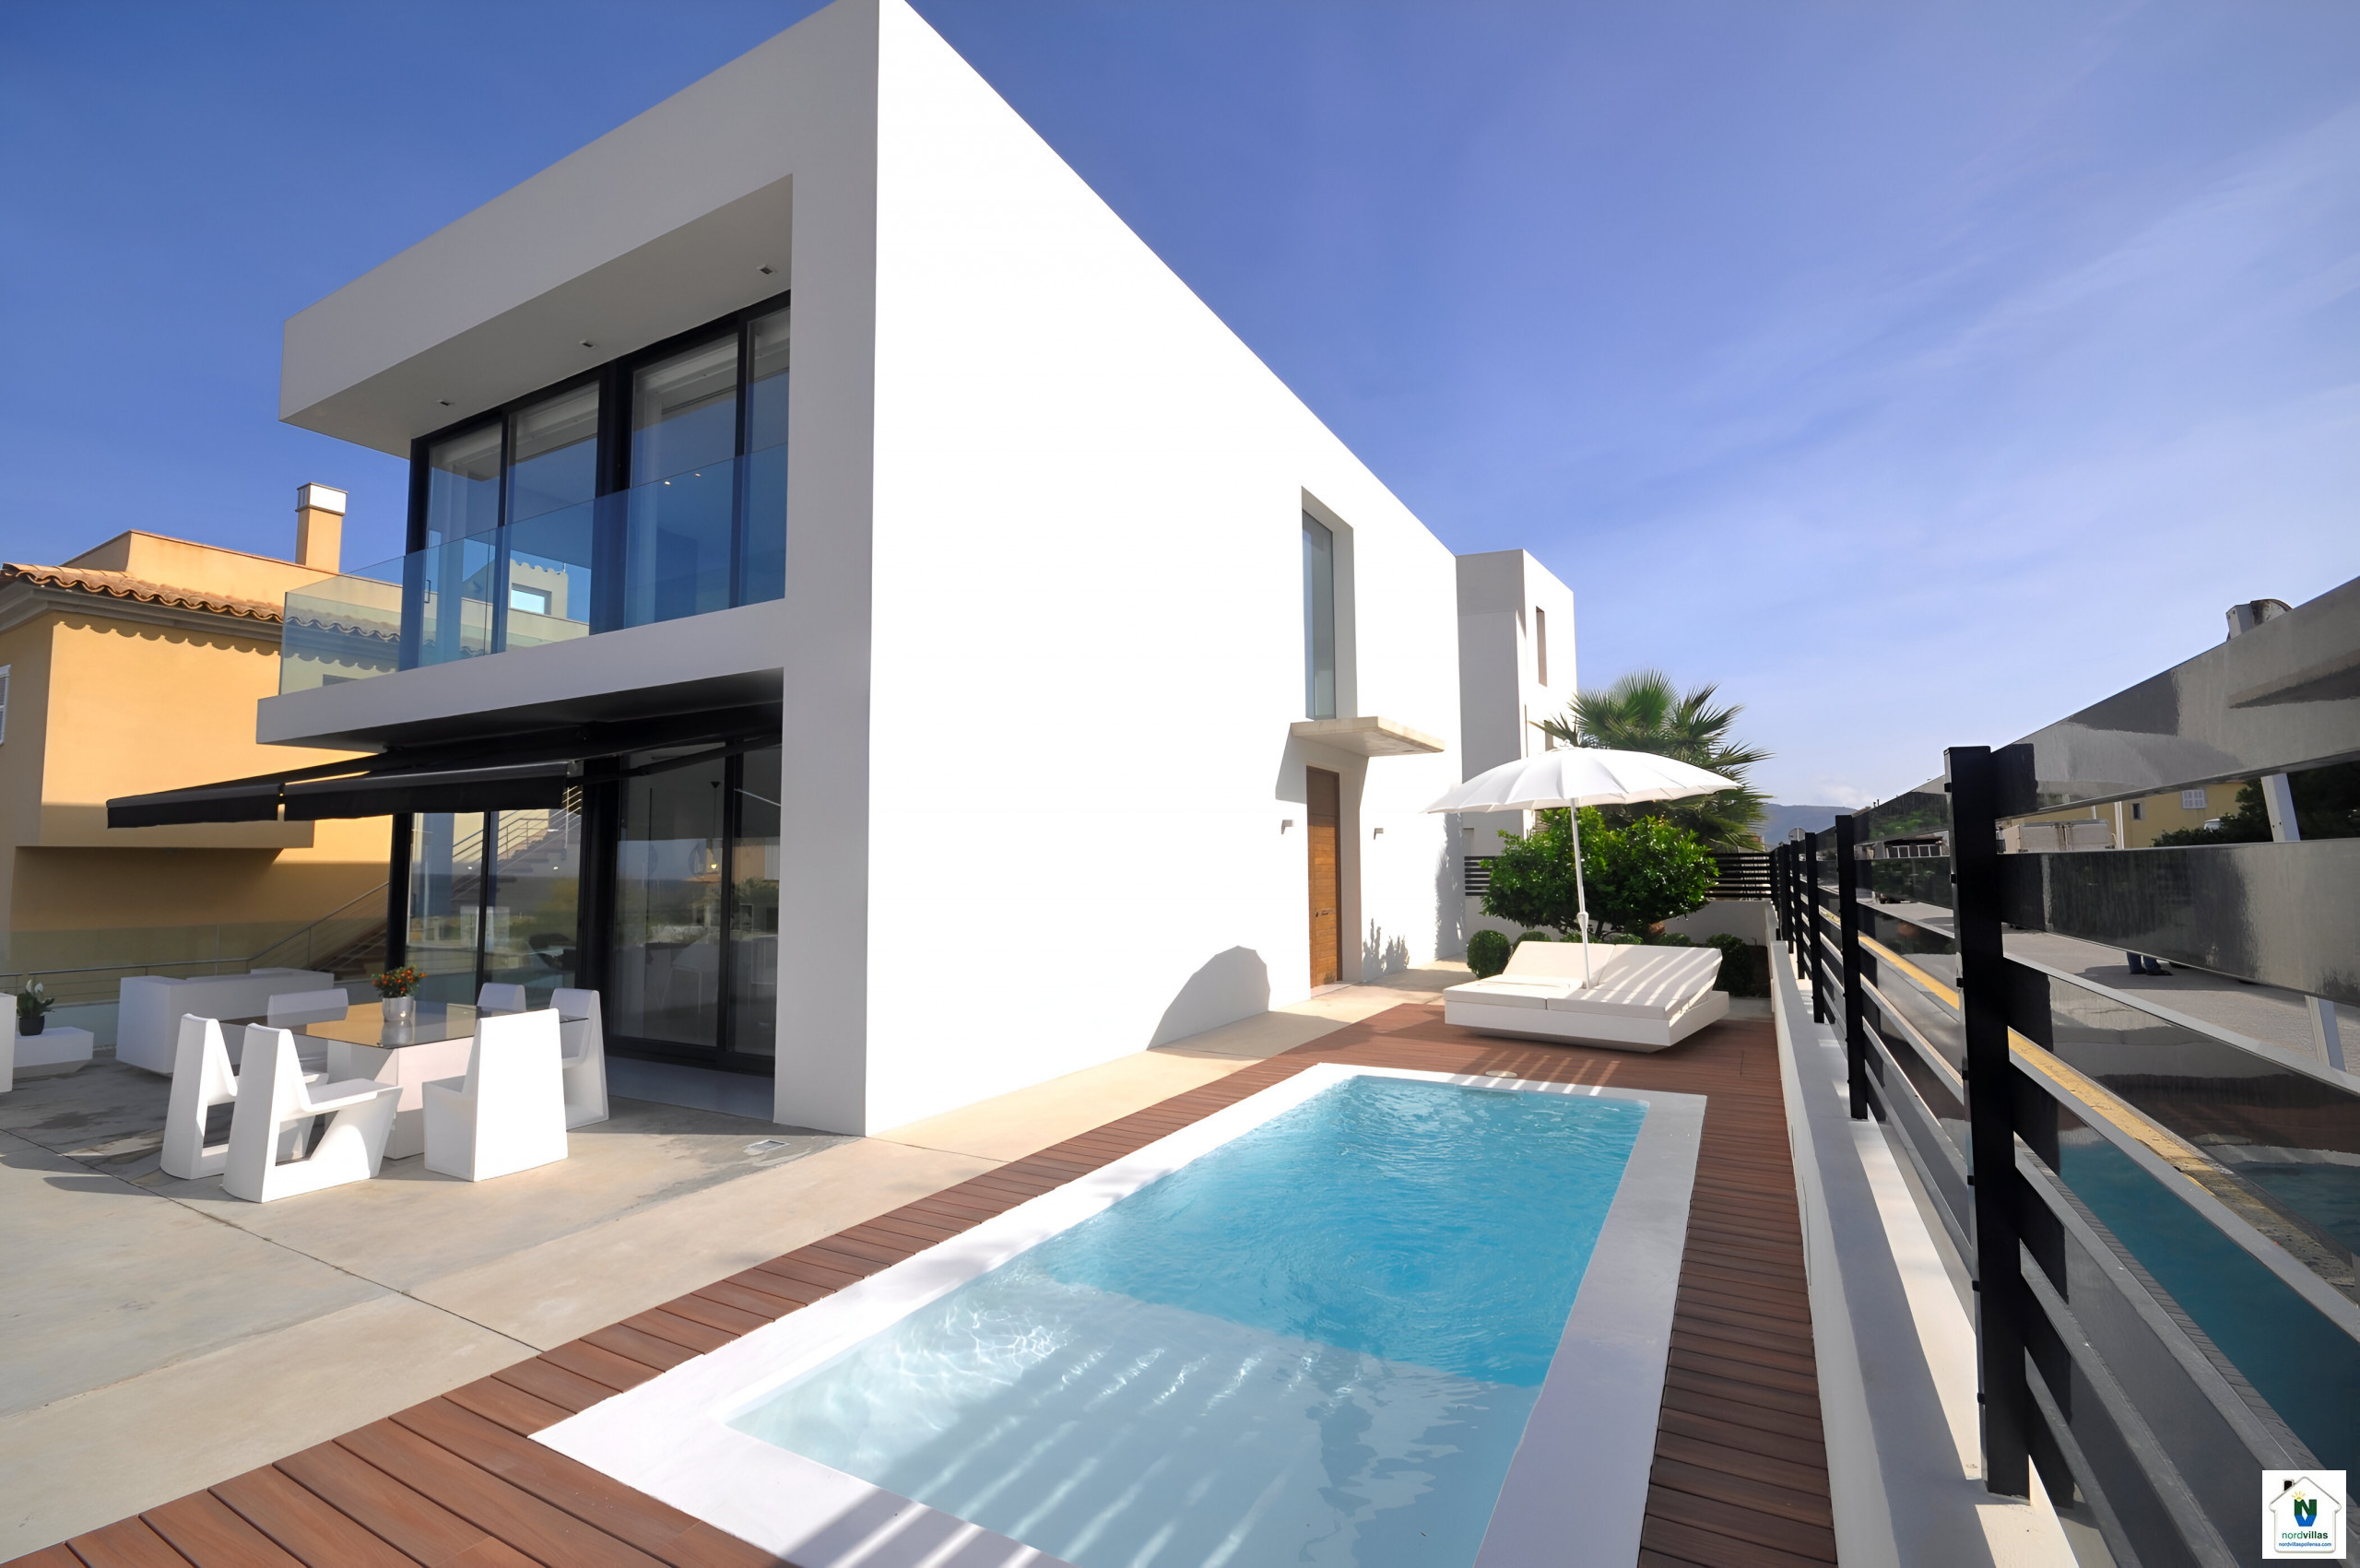 Luxury house with swimming pool for rent in Mallorca